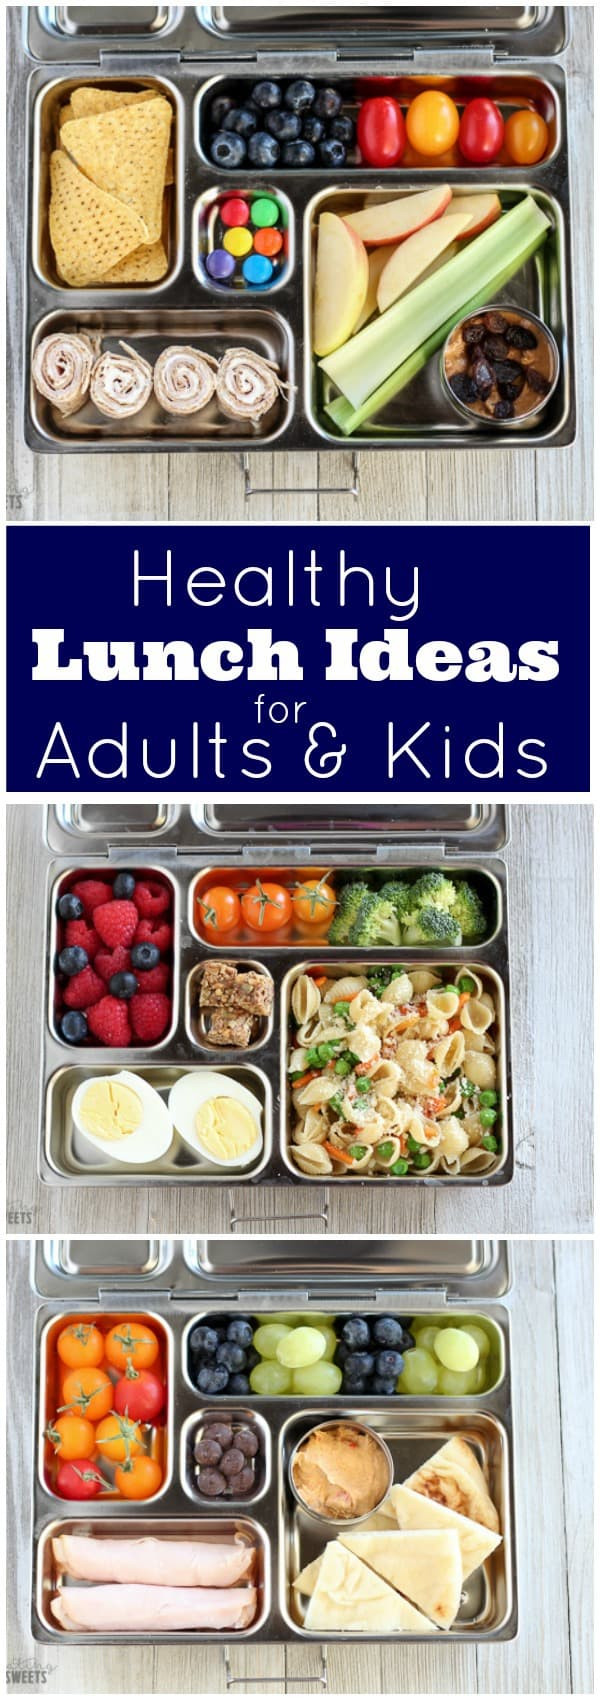 Healthy Lunch Snacks
 Healthy Lunch Ideas for Adults and Kids